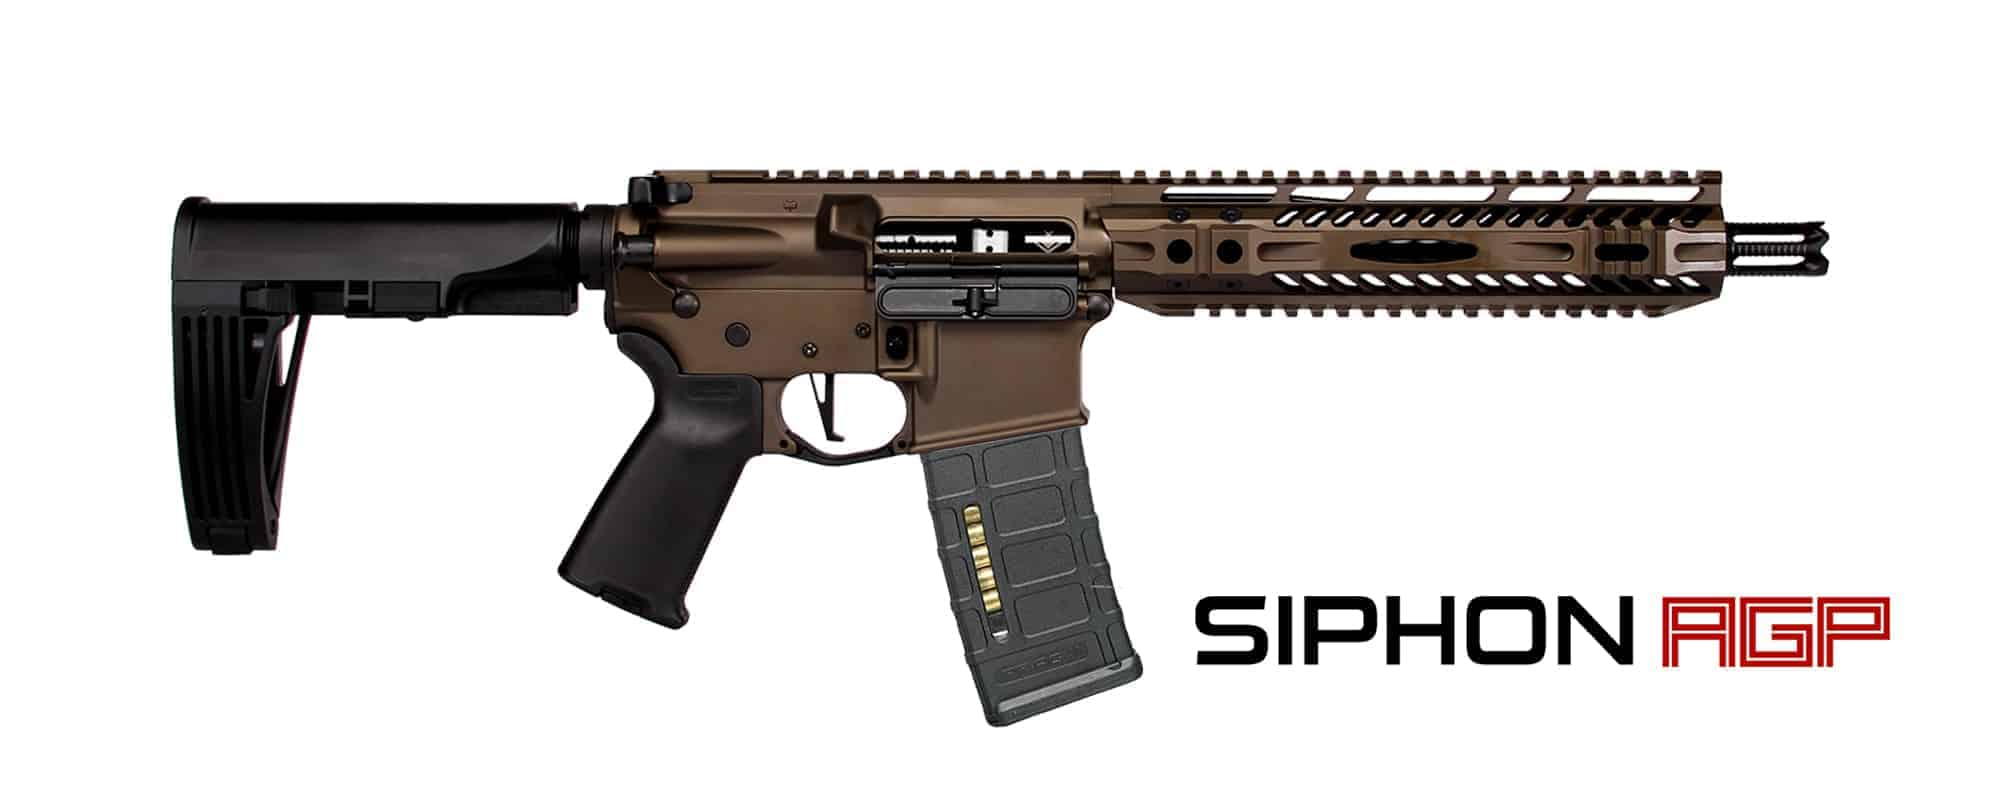 9.2" Siphon Barrel Pistol Dirty Bronze With GPX 9" Rail System